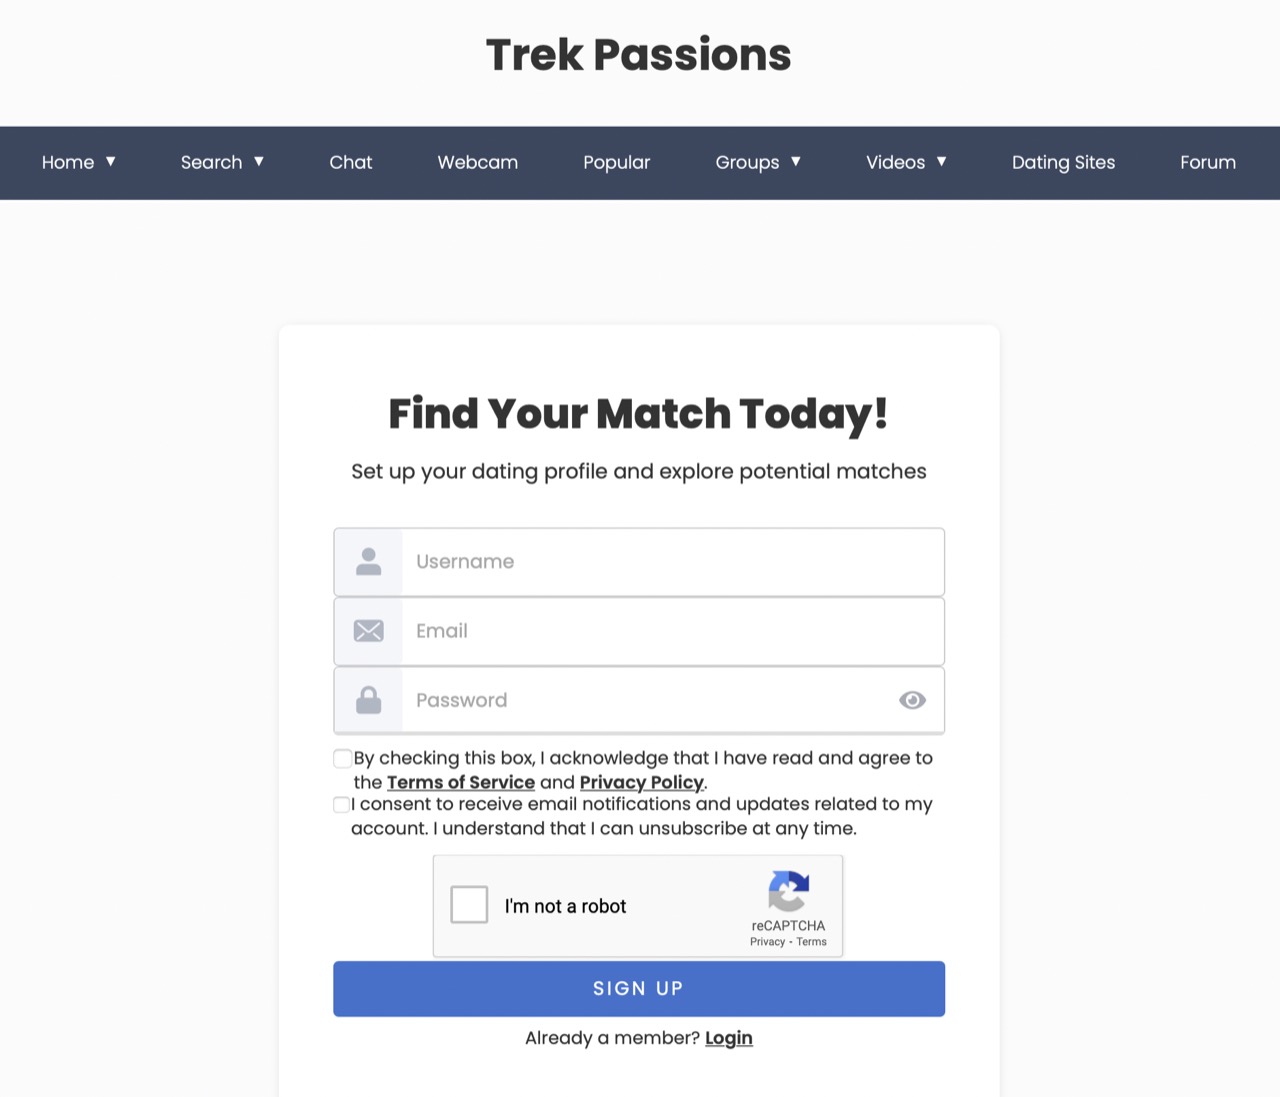 trekpassions-review-signup-2